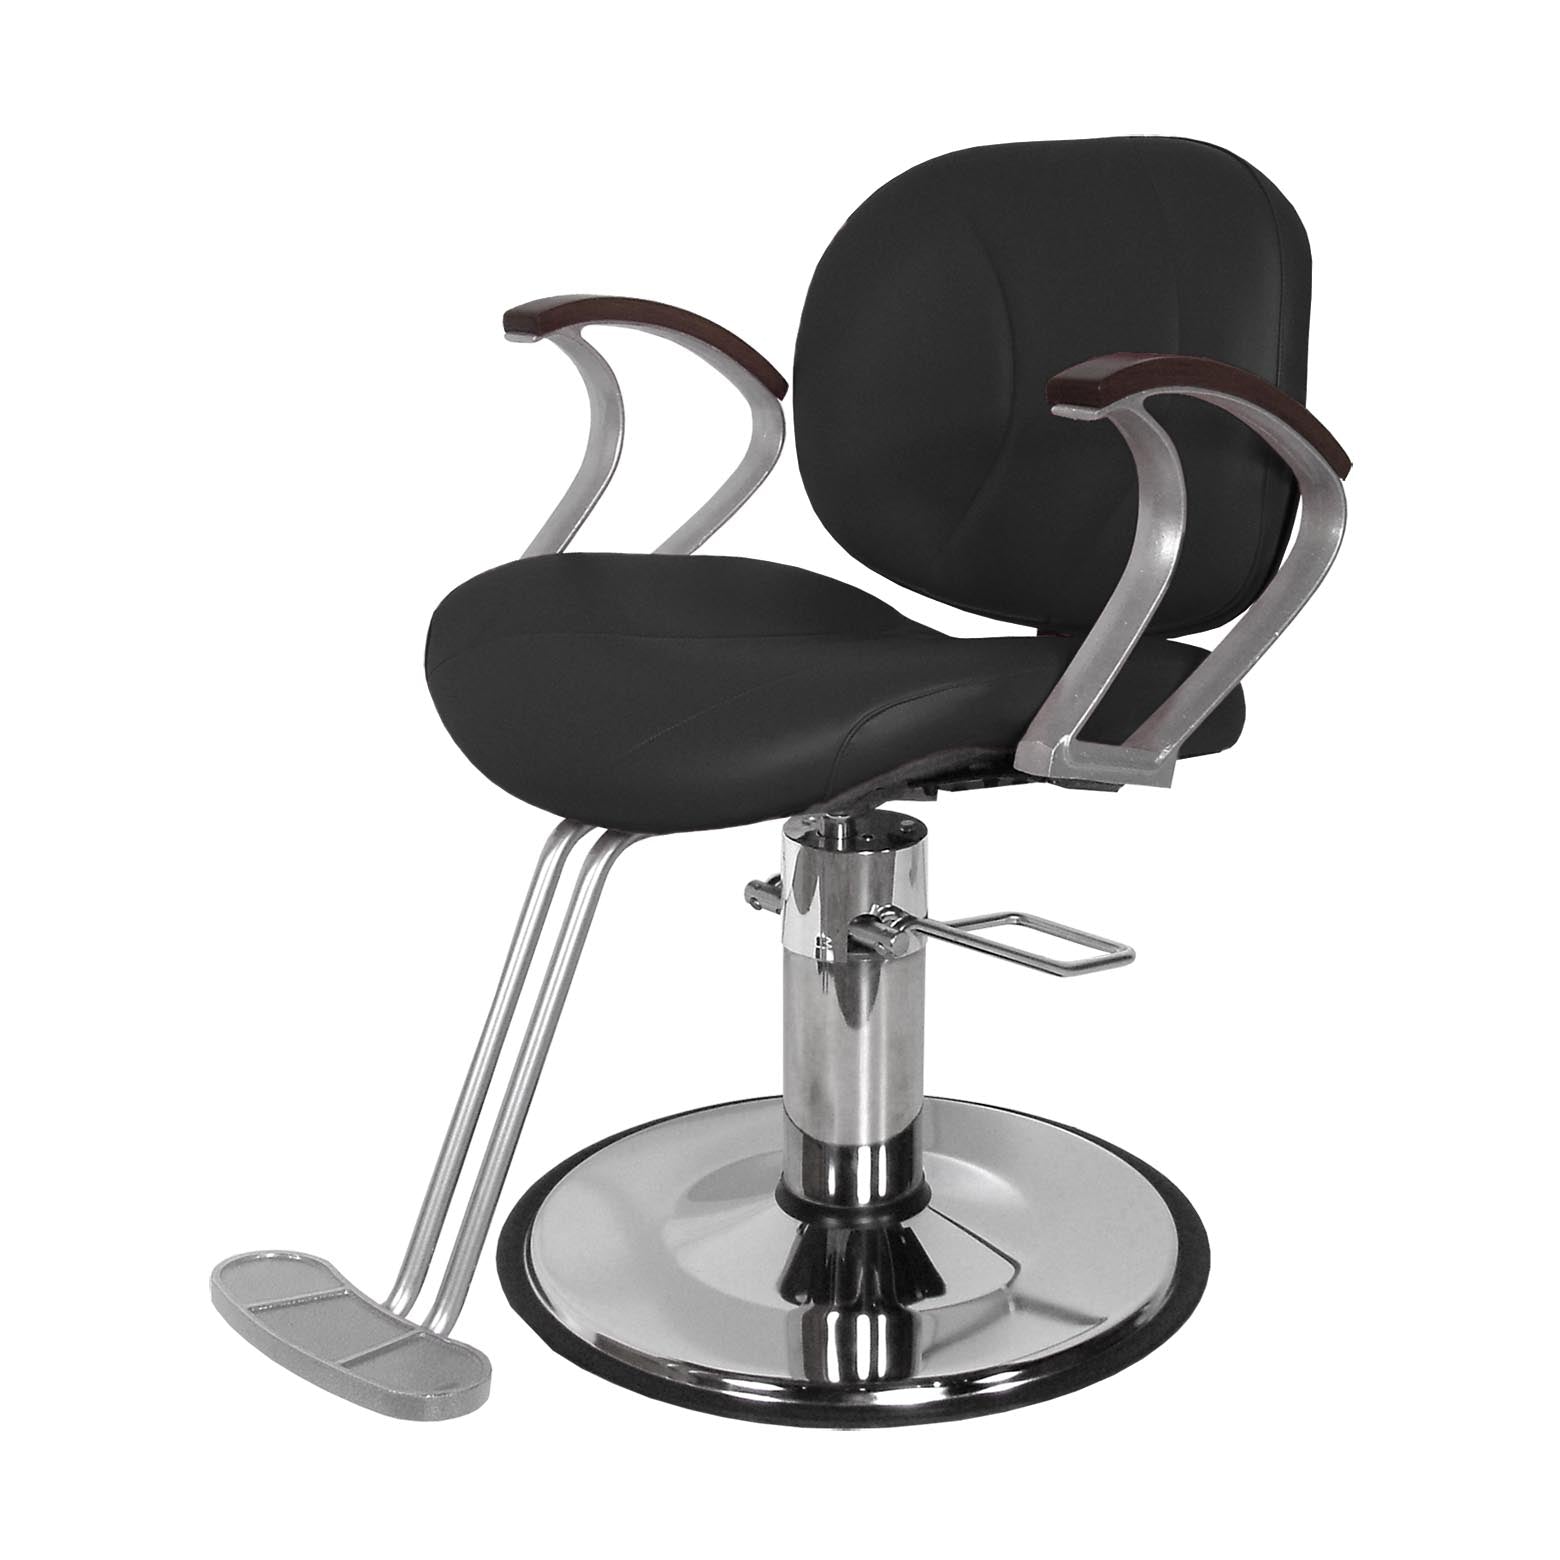 Belize Styling Chair - Collins